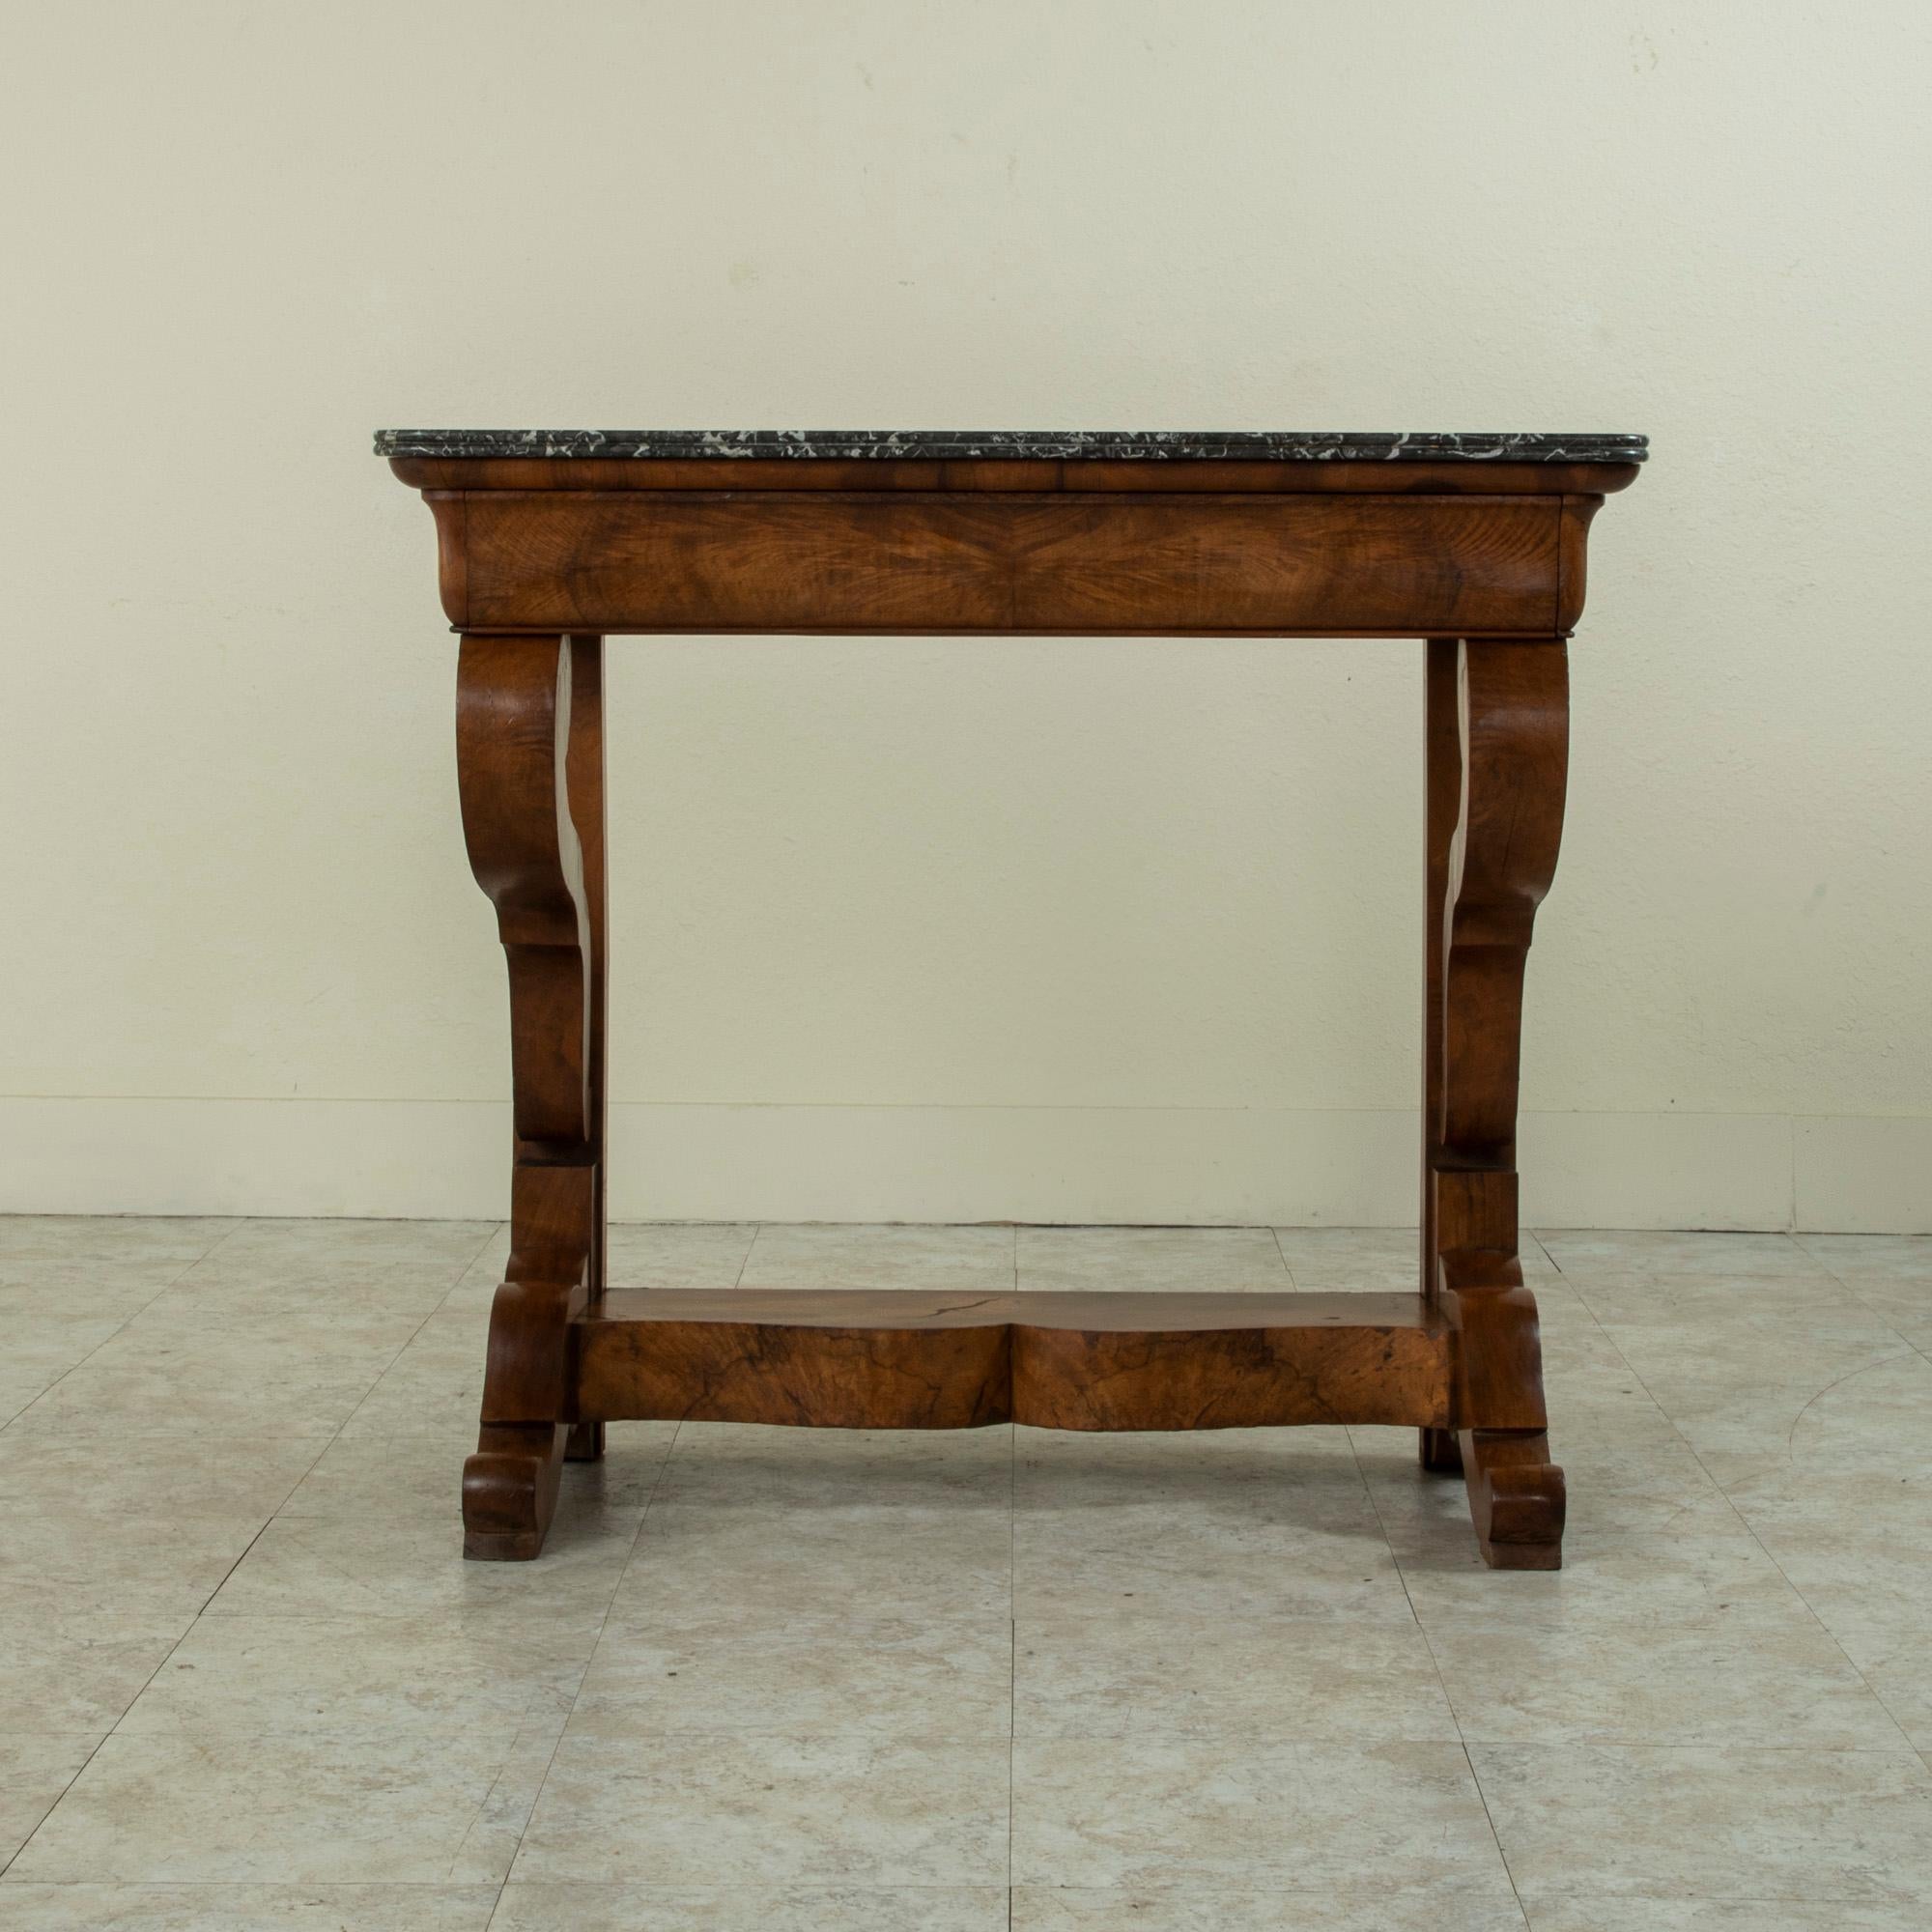 Early 19th Century French Restauration Period Burl Walnut Console Table, Marble In Good Condition For Sale In Fayetteville, AR